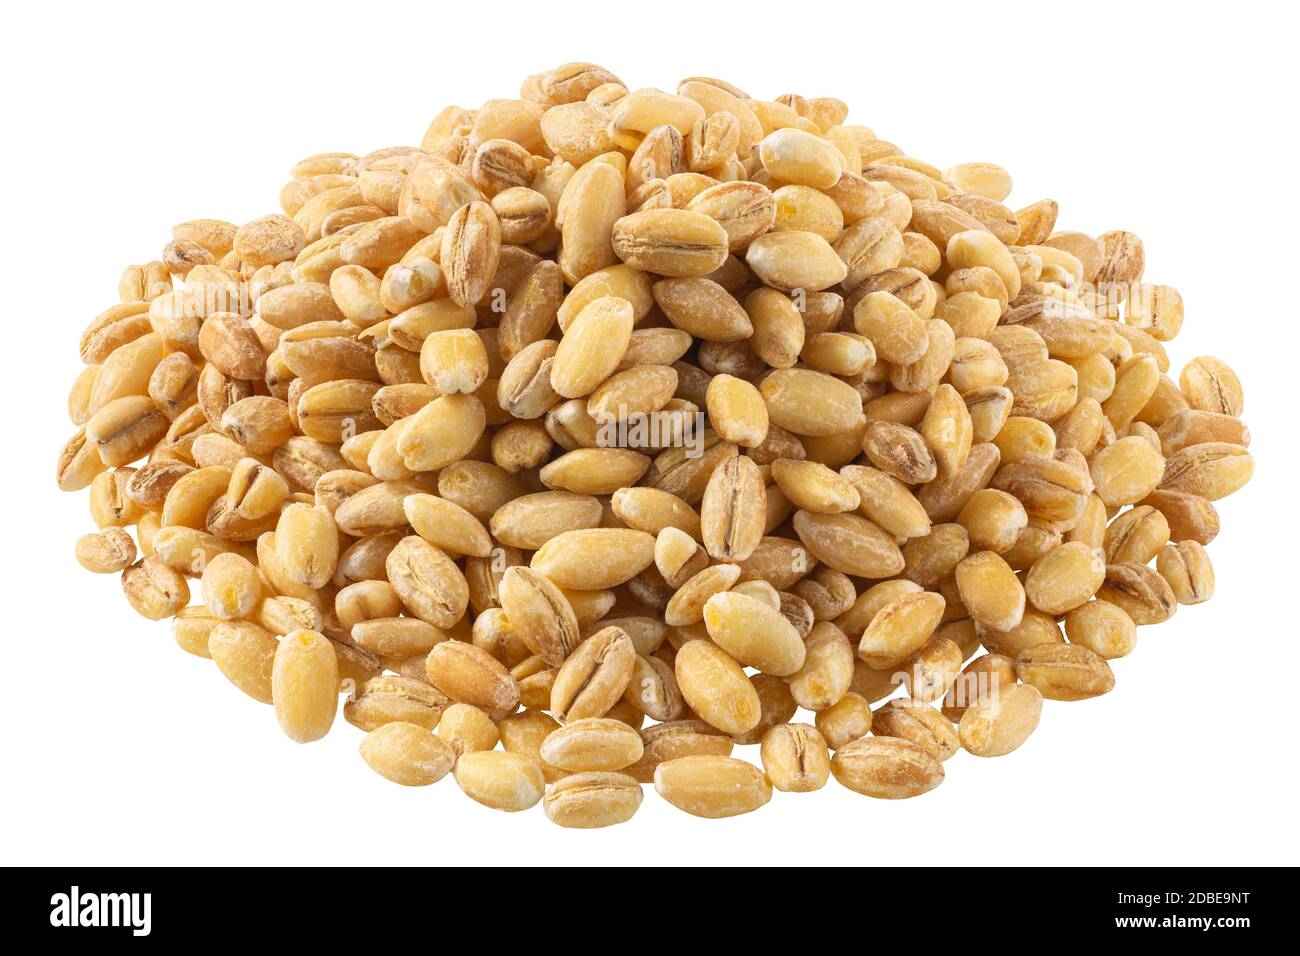 Pile of uncooked pearl barley, a wholegrain cereal, isolated Stock Photo